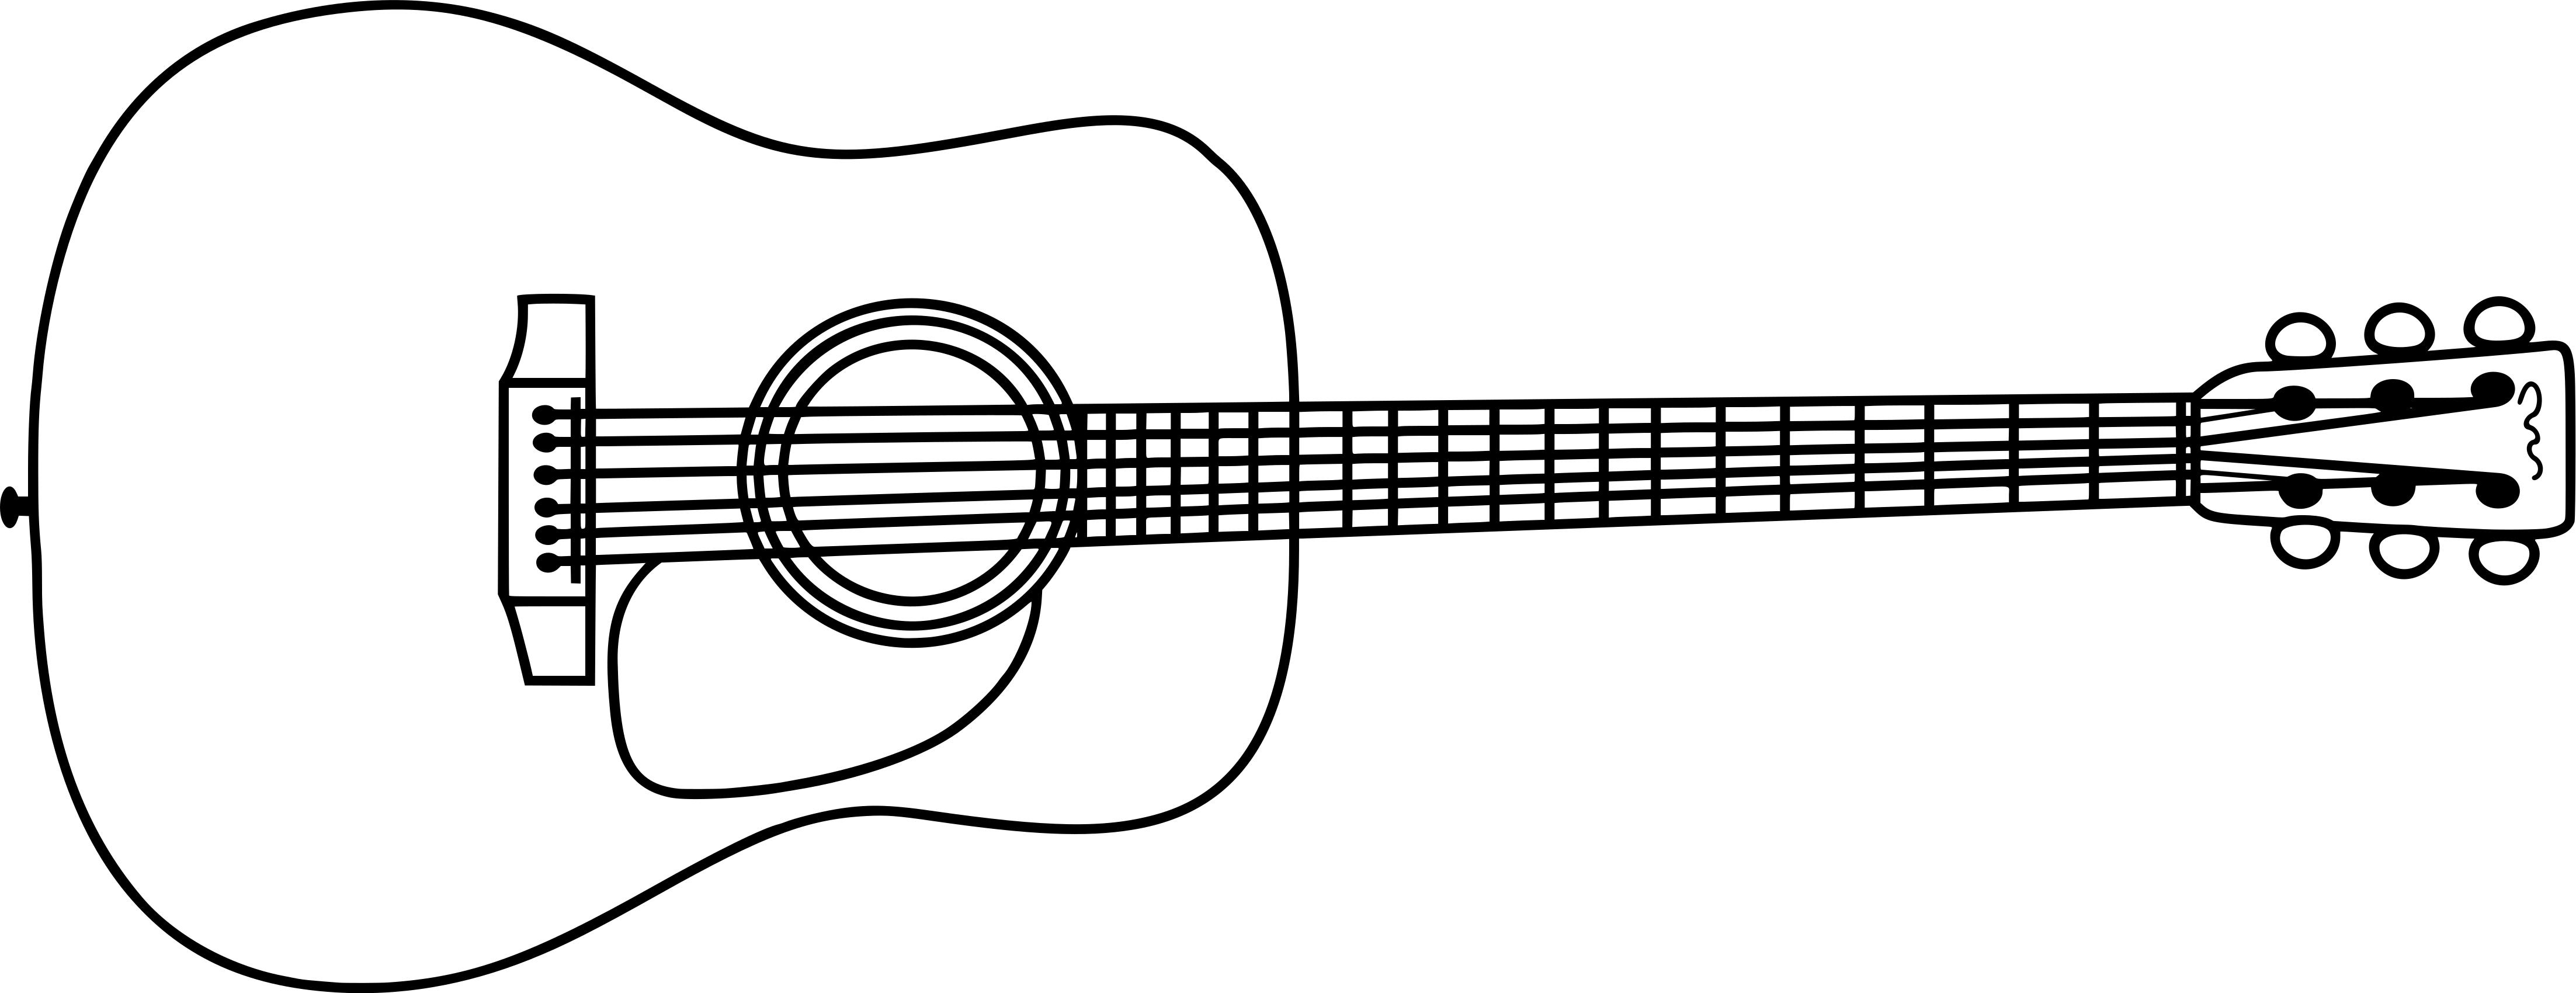 12 string guitar clipart 30 free Cliparts | Download images on ...